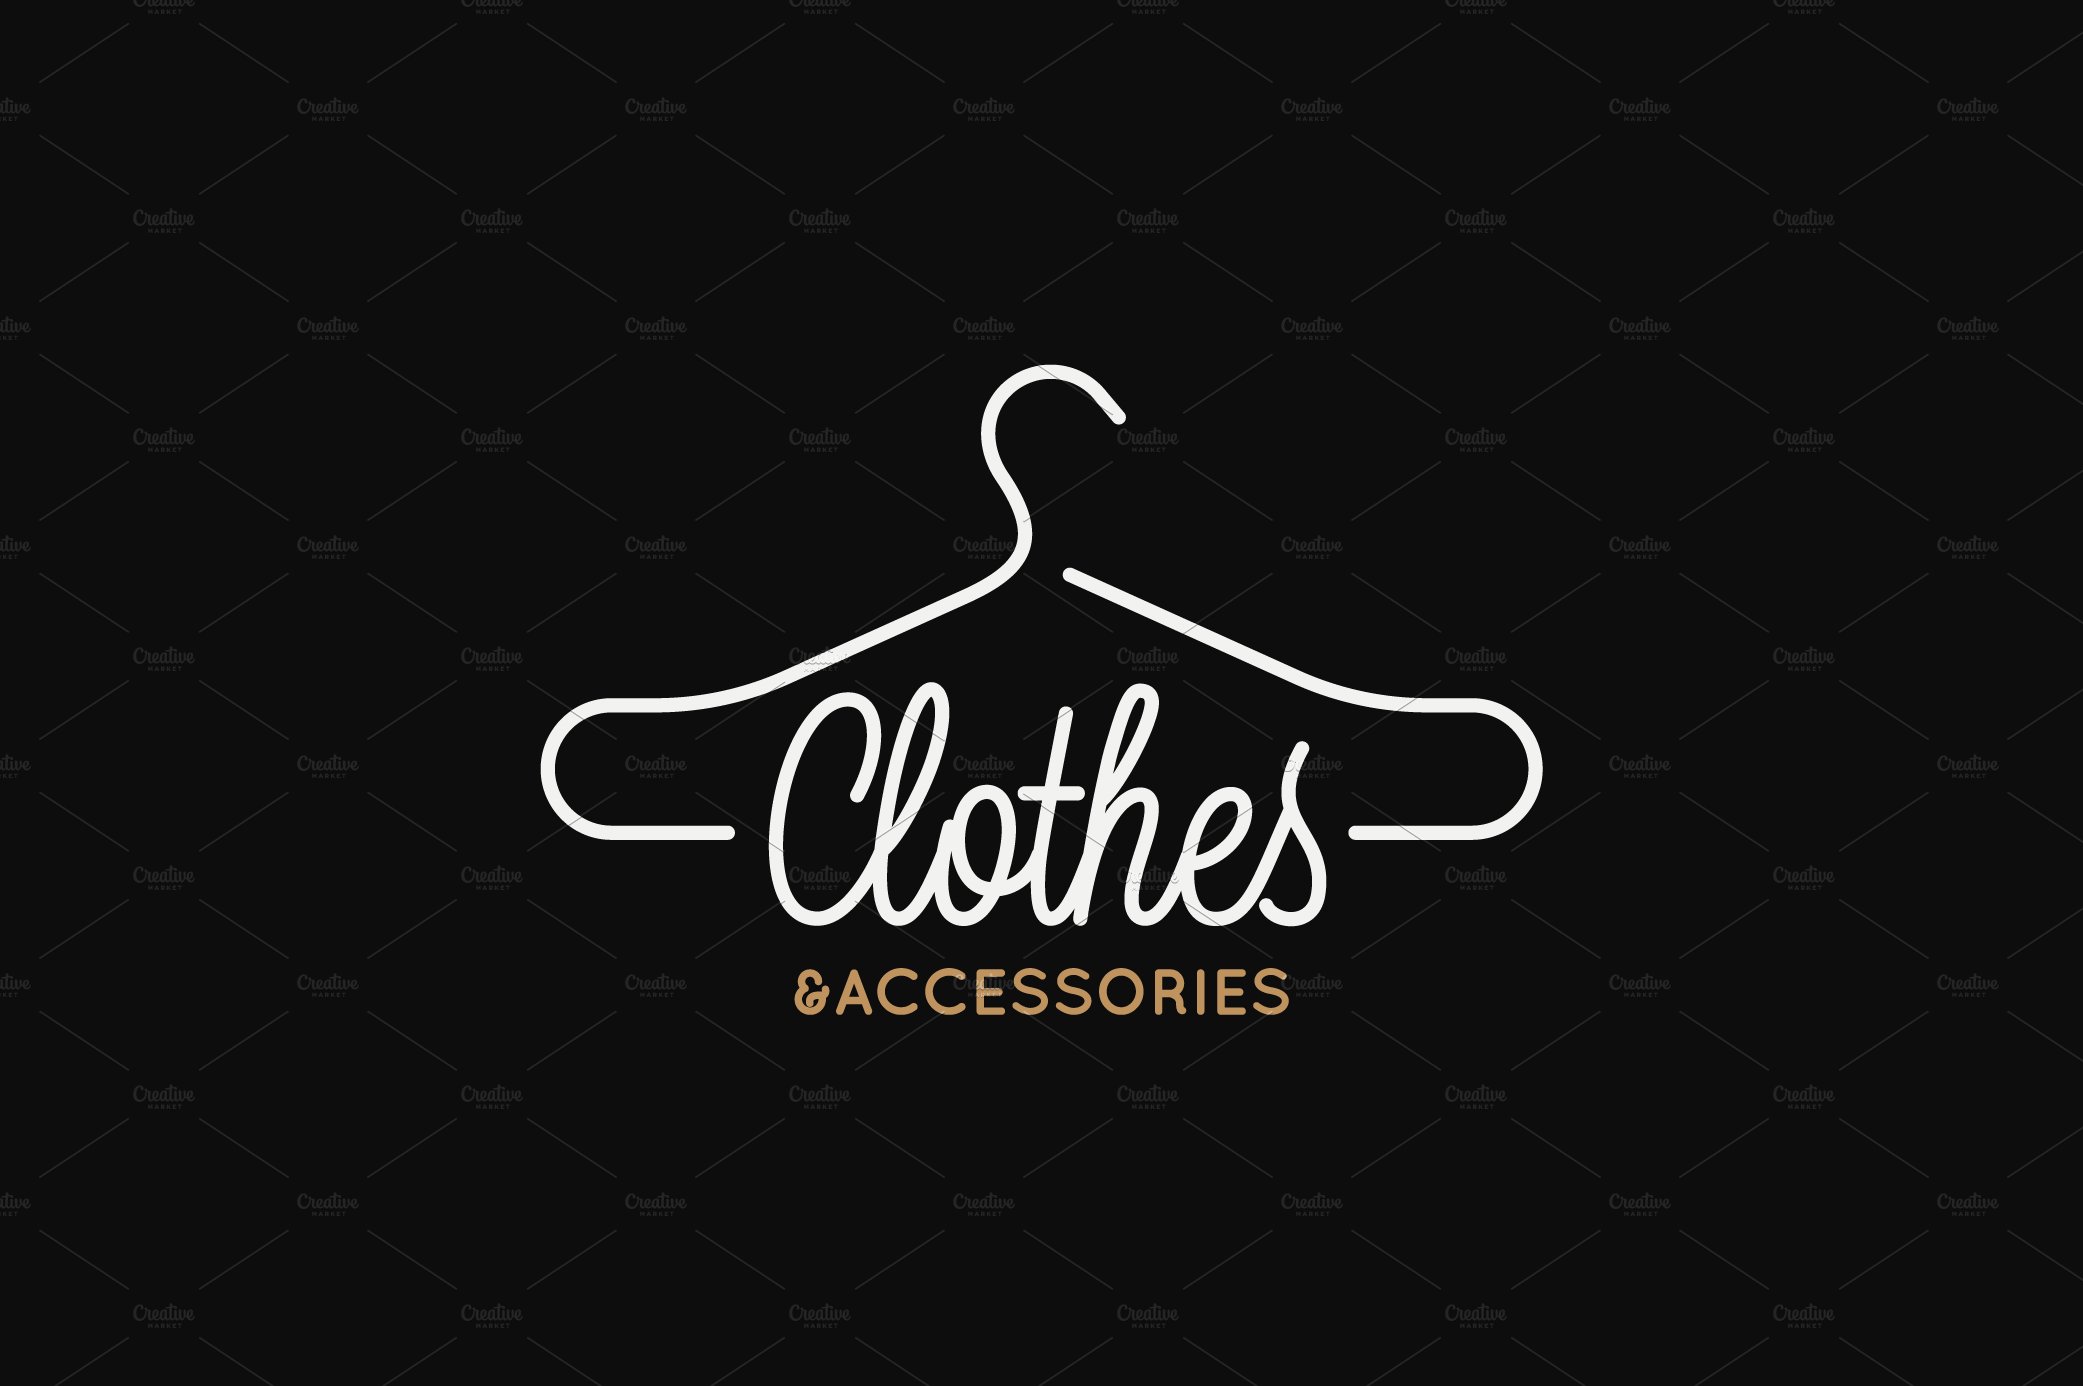 Clothes and accessories logo. –